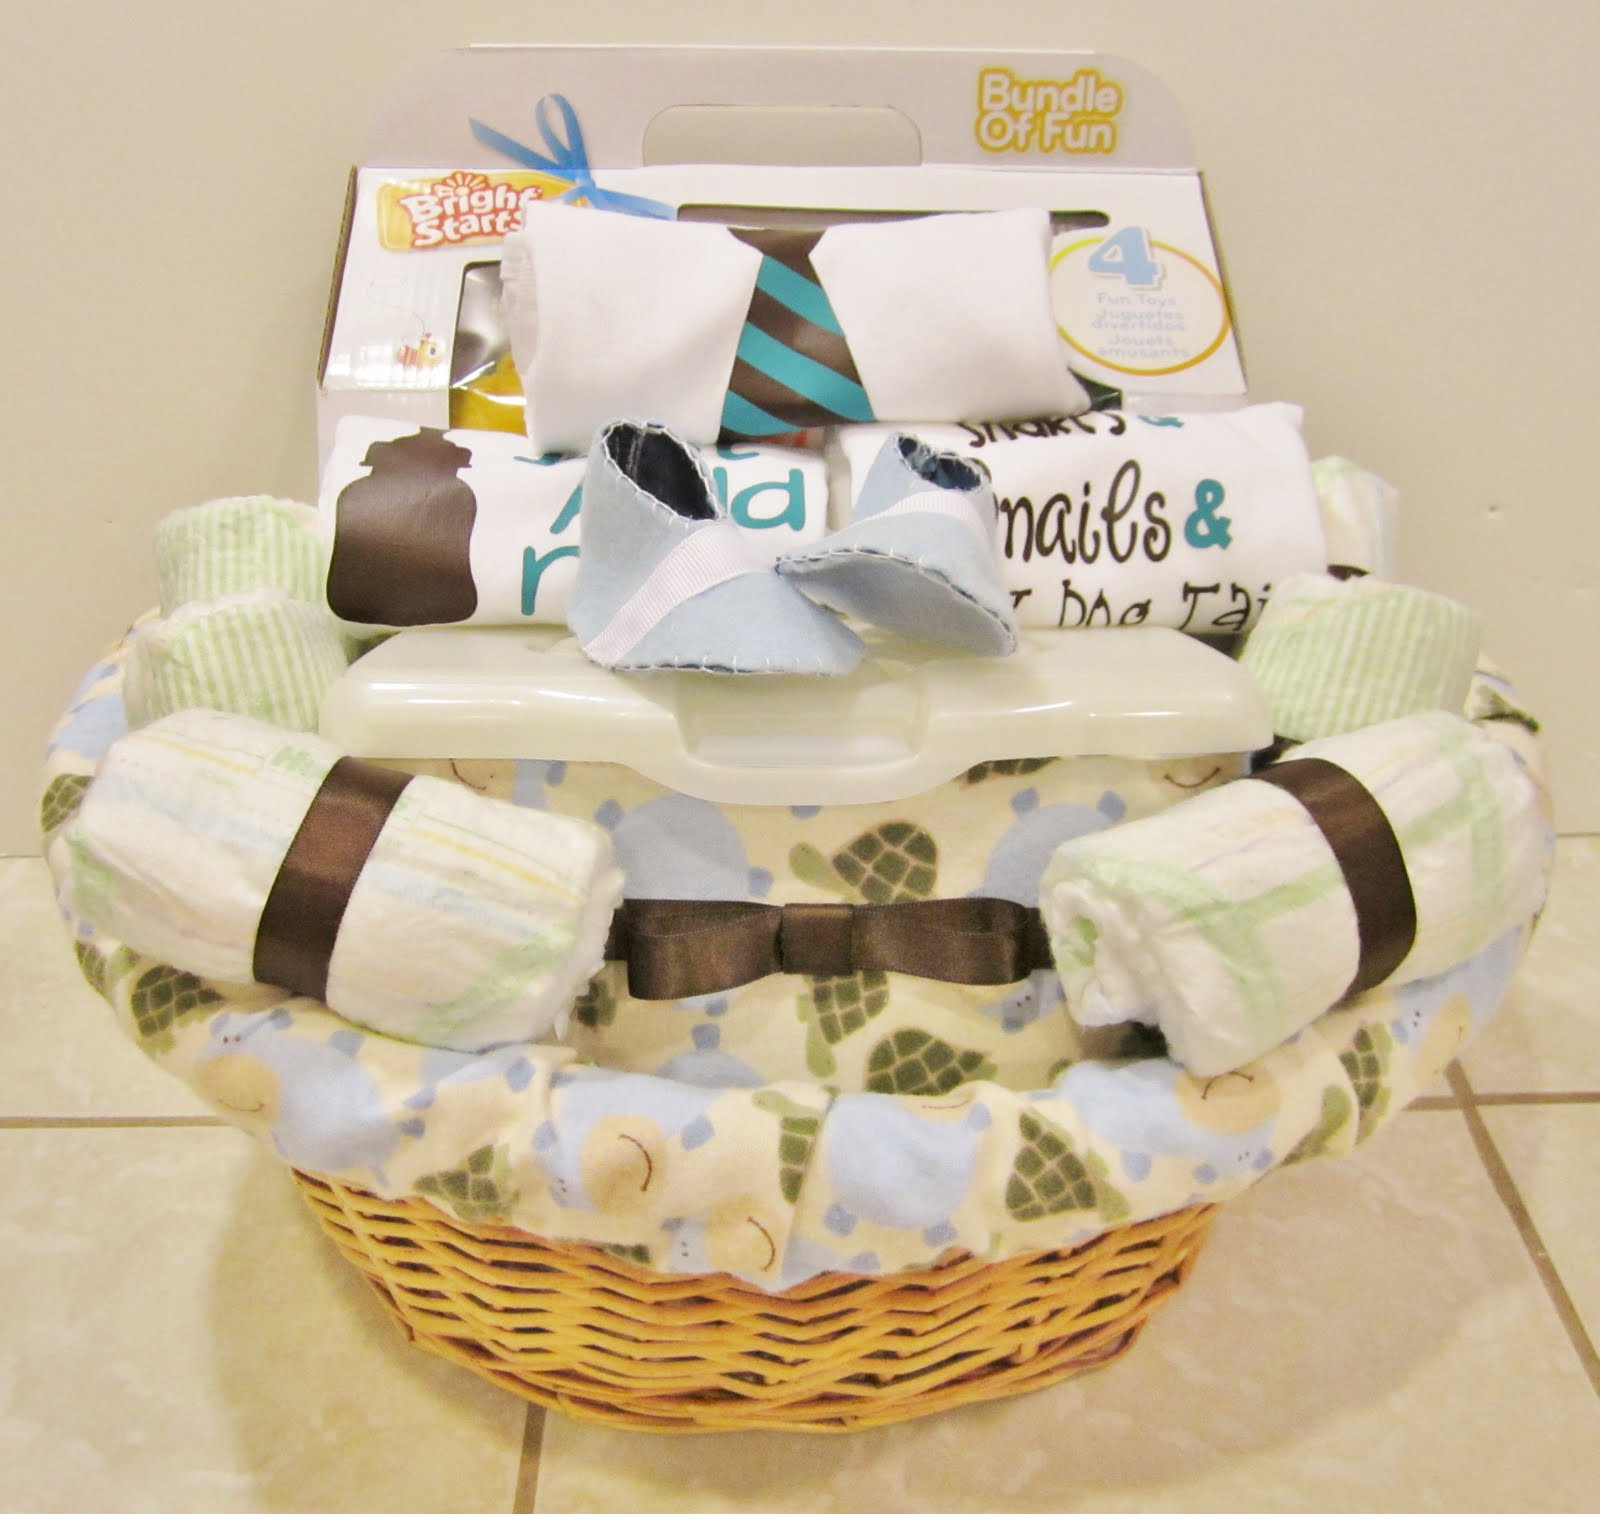 Shower Gift Basket Ideas
 Life in the Motherhood Baby Shower Gift Basket For a